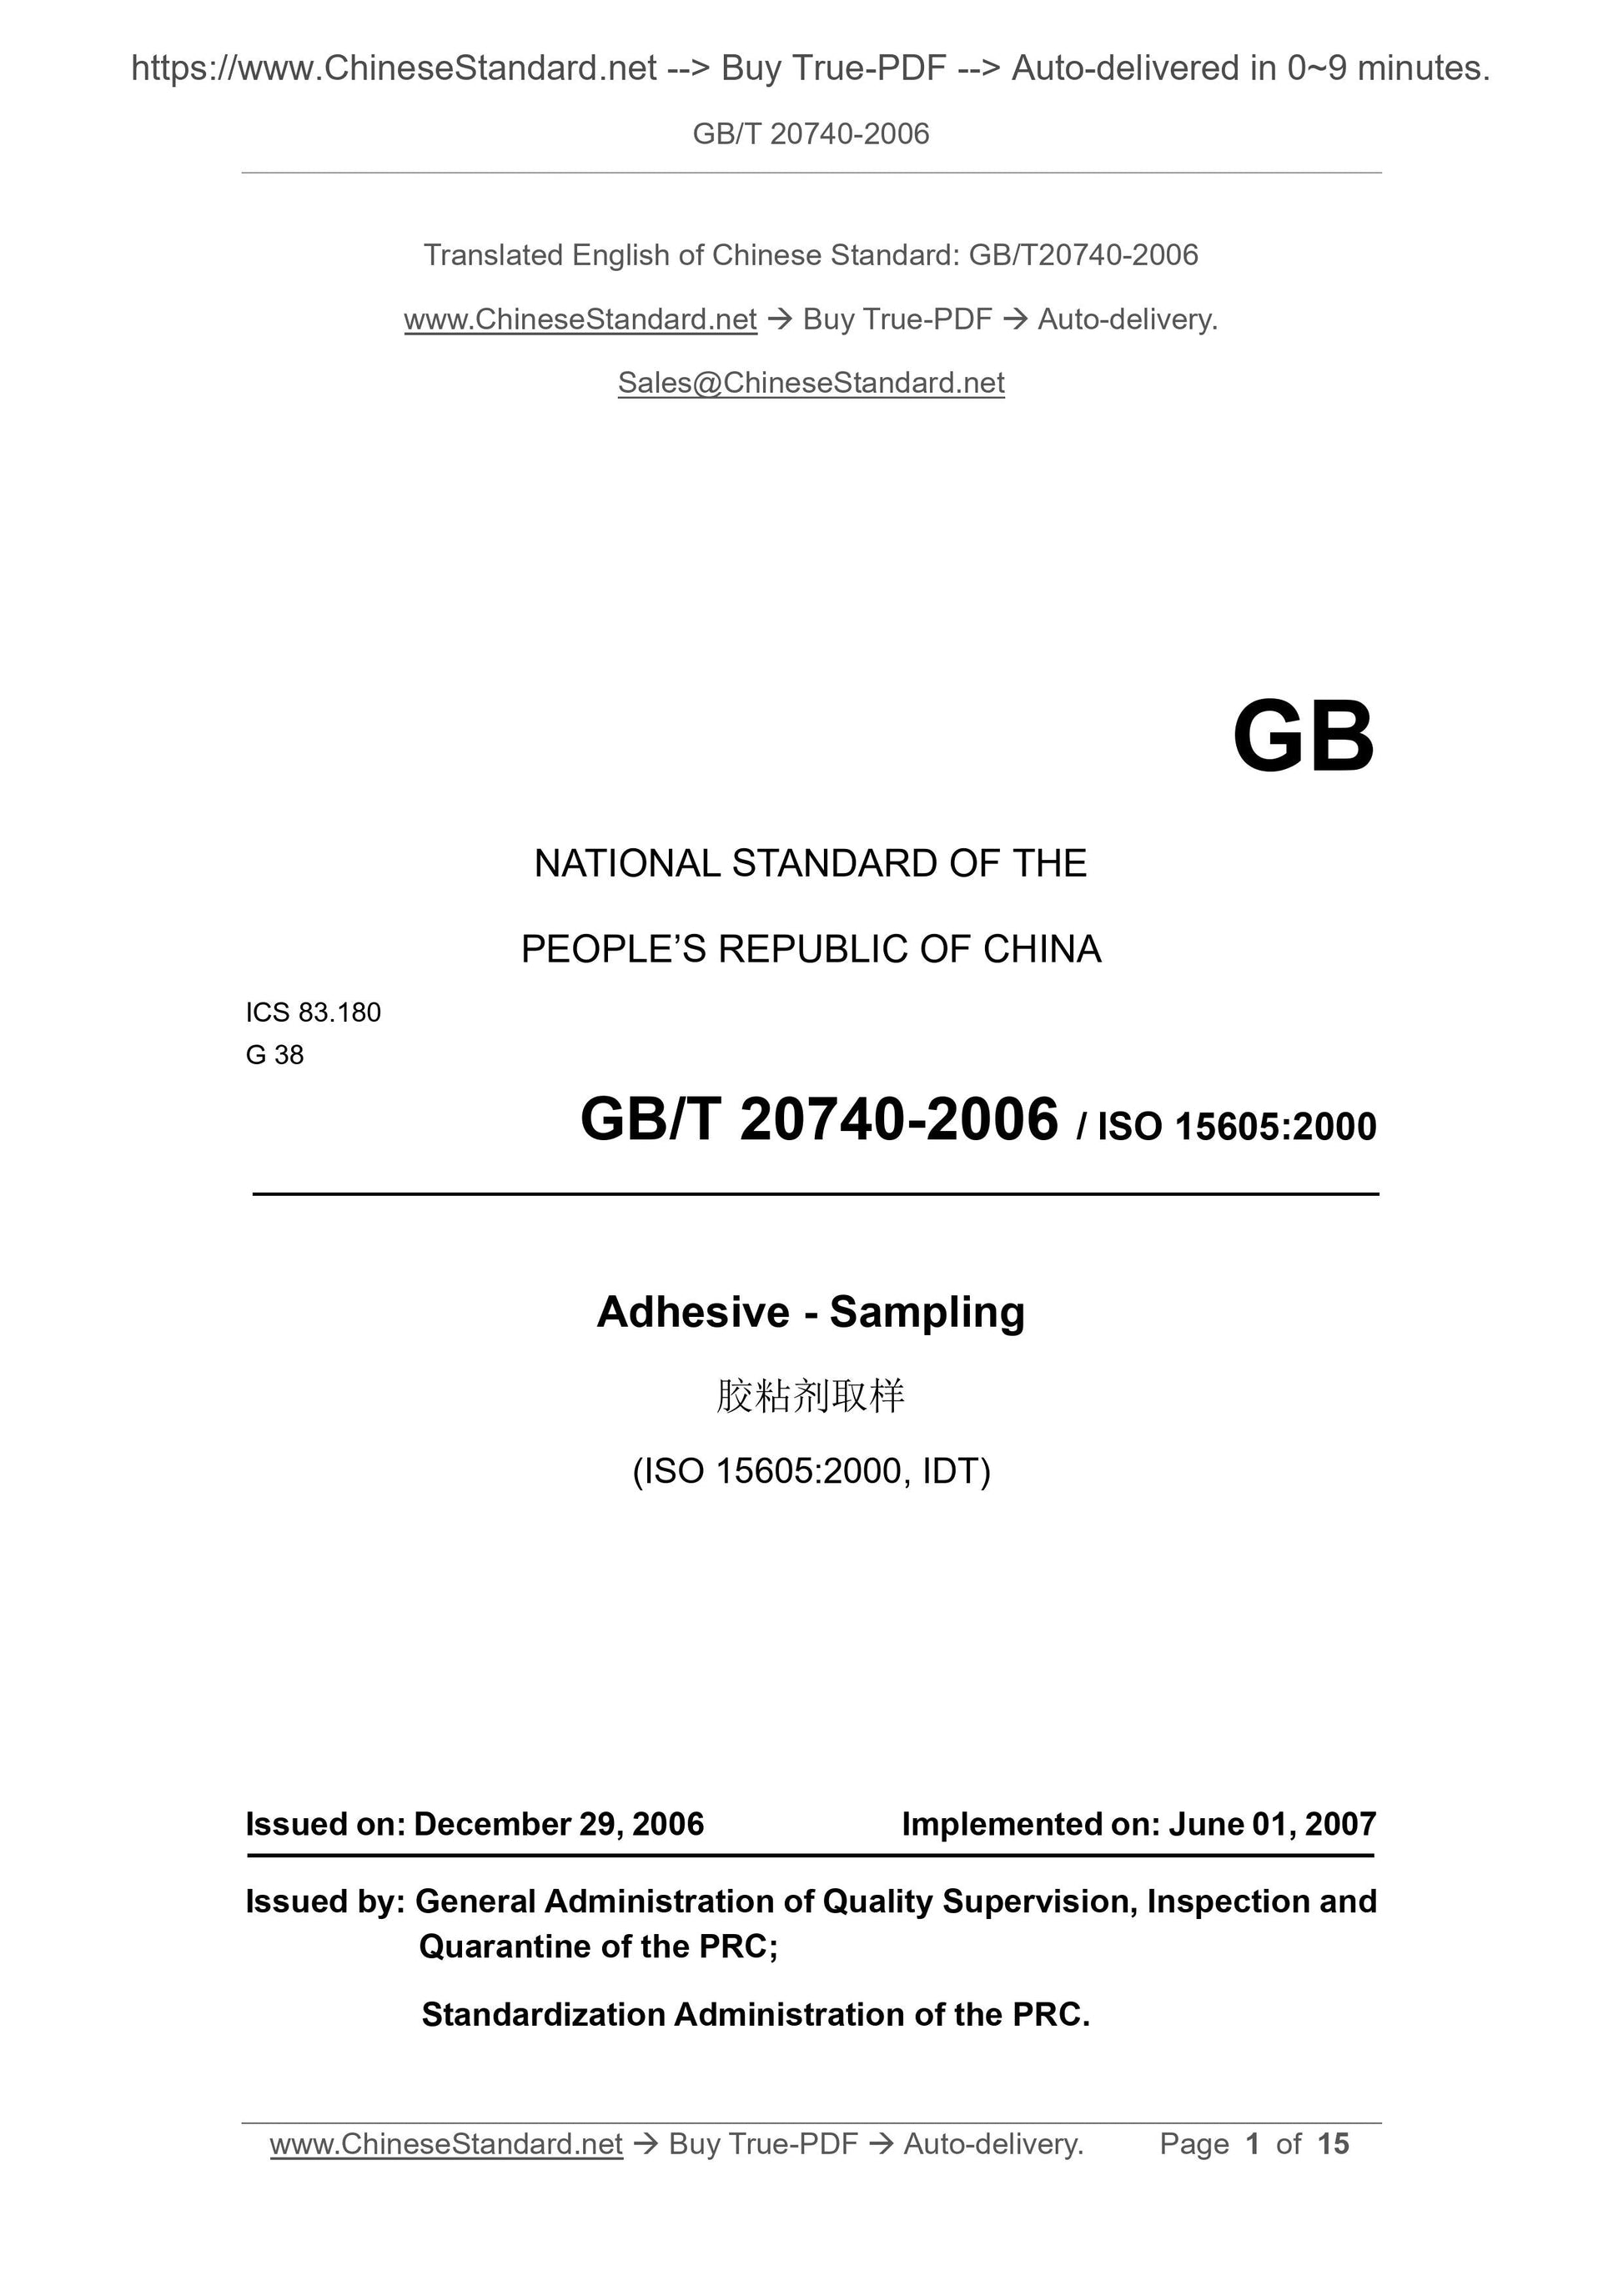 GB/T 20740-2006 Page 1